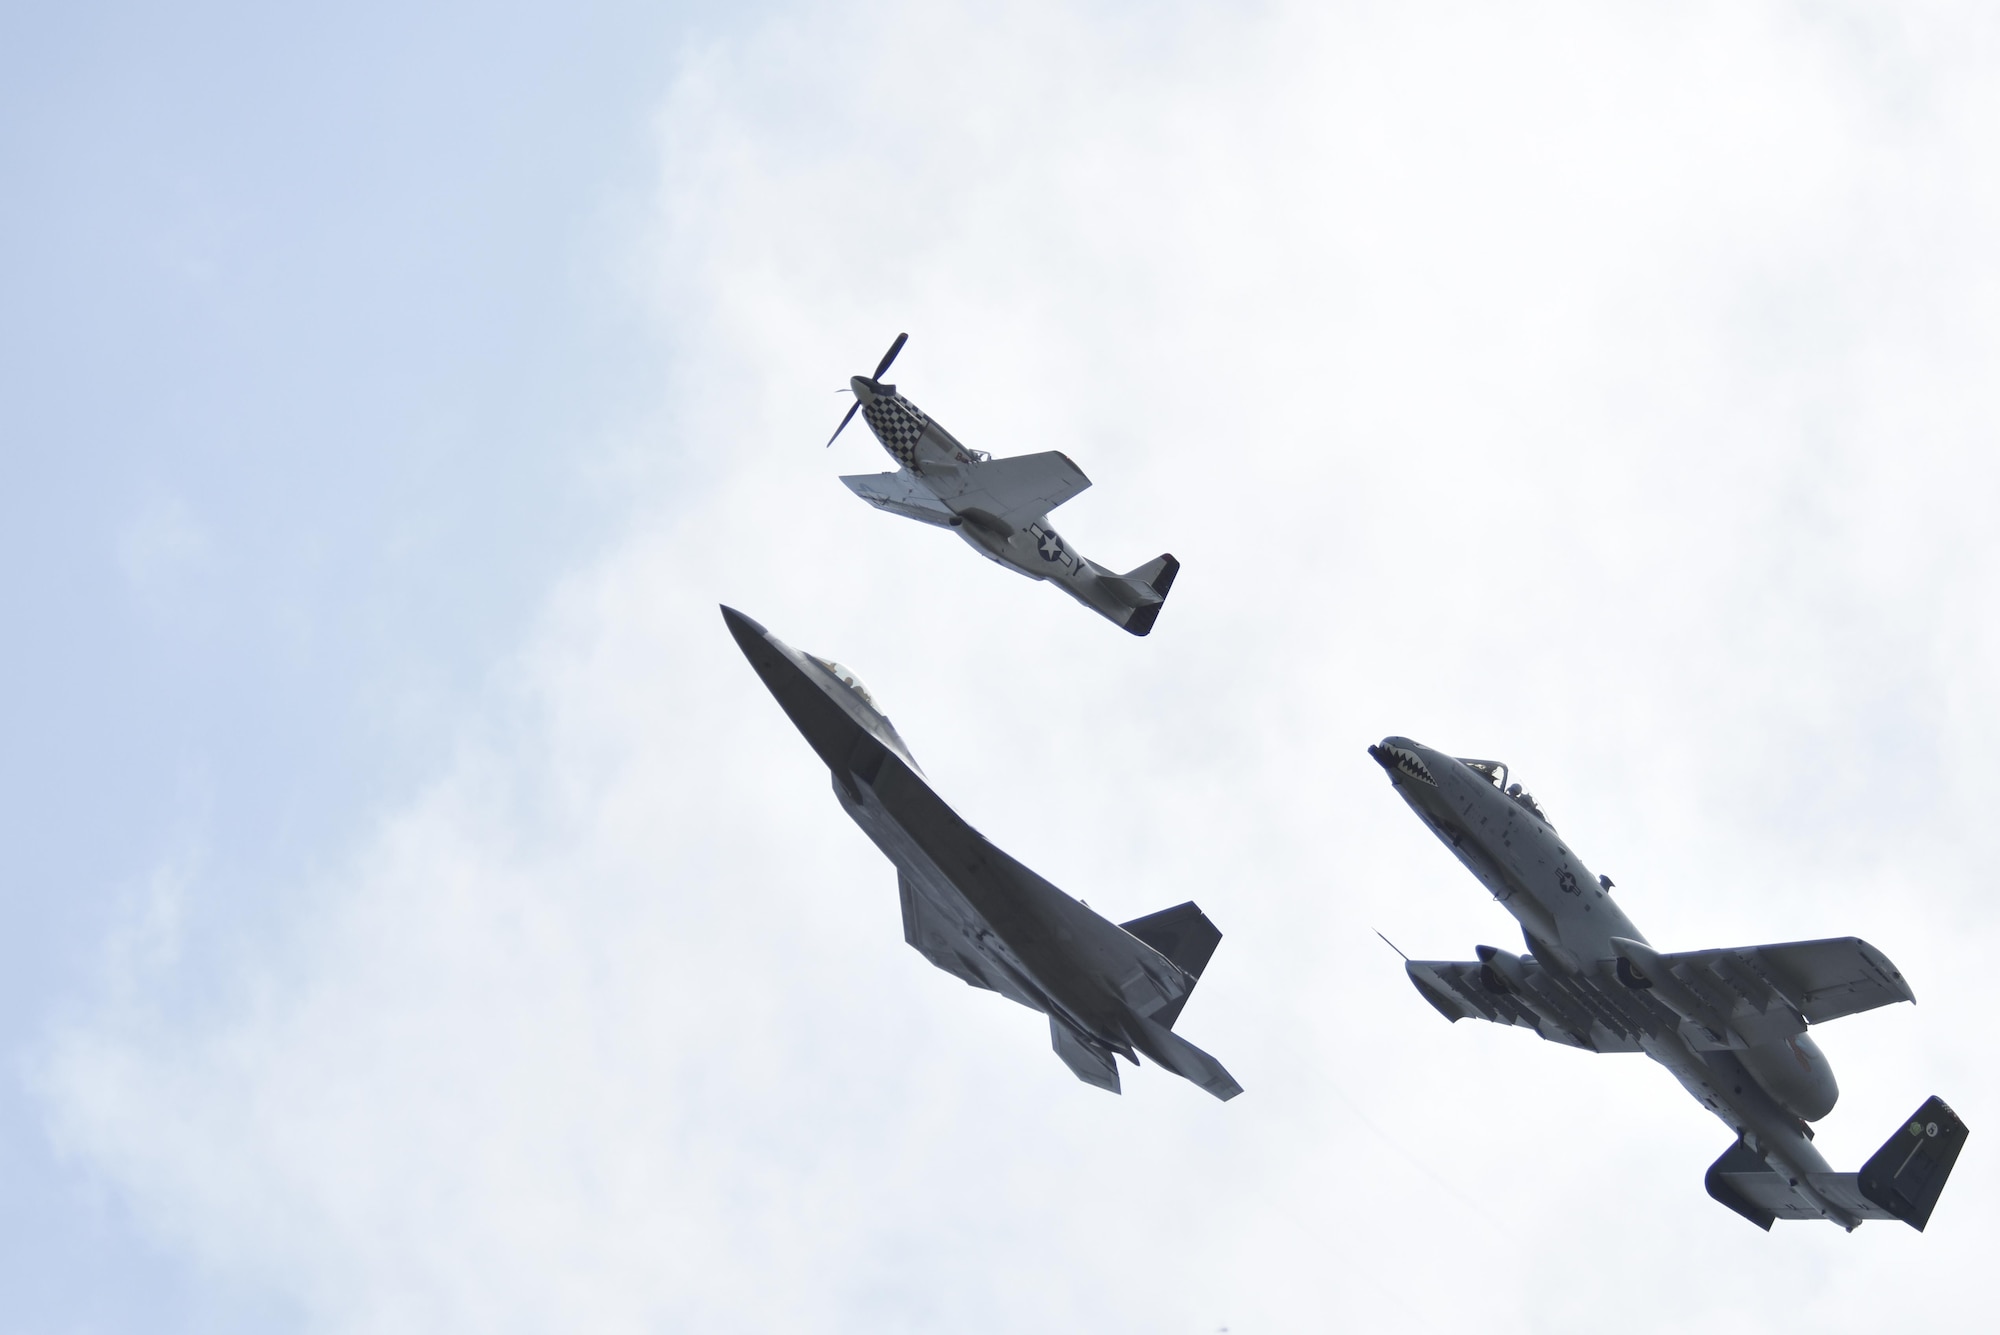 A P-51D Mustang, F-22 Raptor and A-10 Thunderbolt perform a tribute flight during the Wings Over Wayne Air Show, May 21, 2017, at Seymour Johnson Air Force Base, North Carolina. The formation consisted of aircraft dating back to World War II to current 5th generation aircraft. (U.S. Air Force photo by Airman 1st Class Christopher Maldonado)